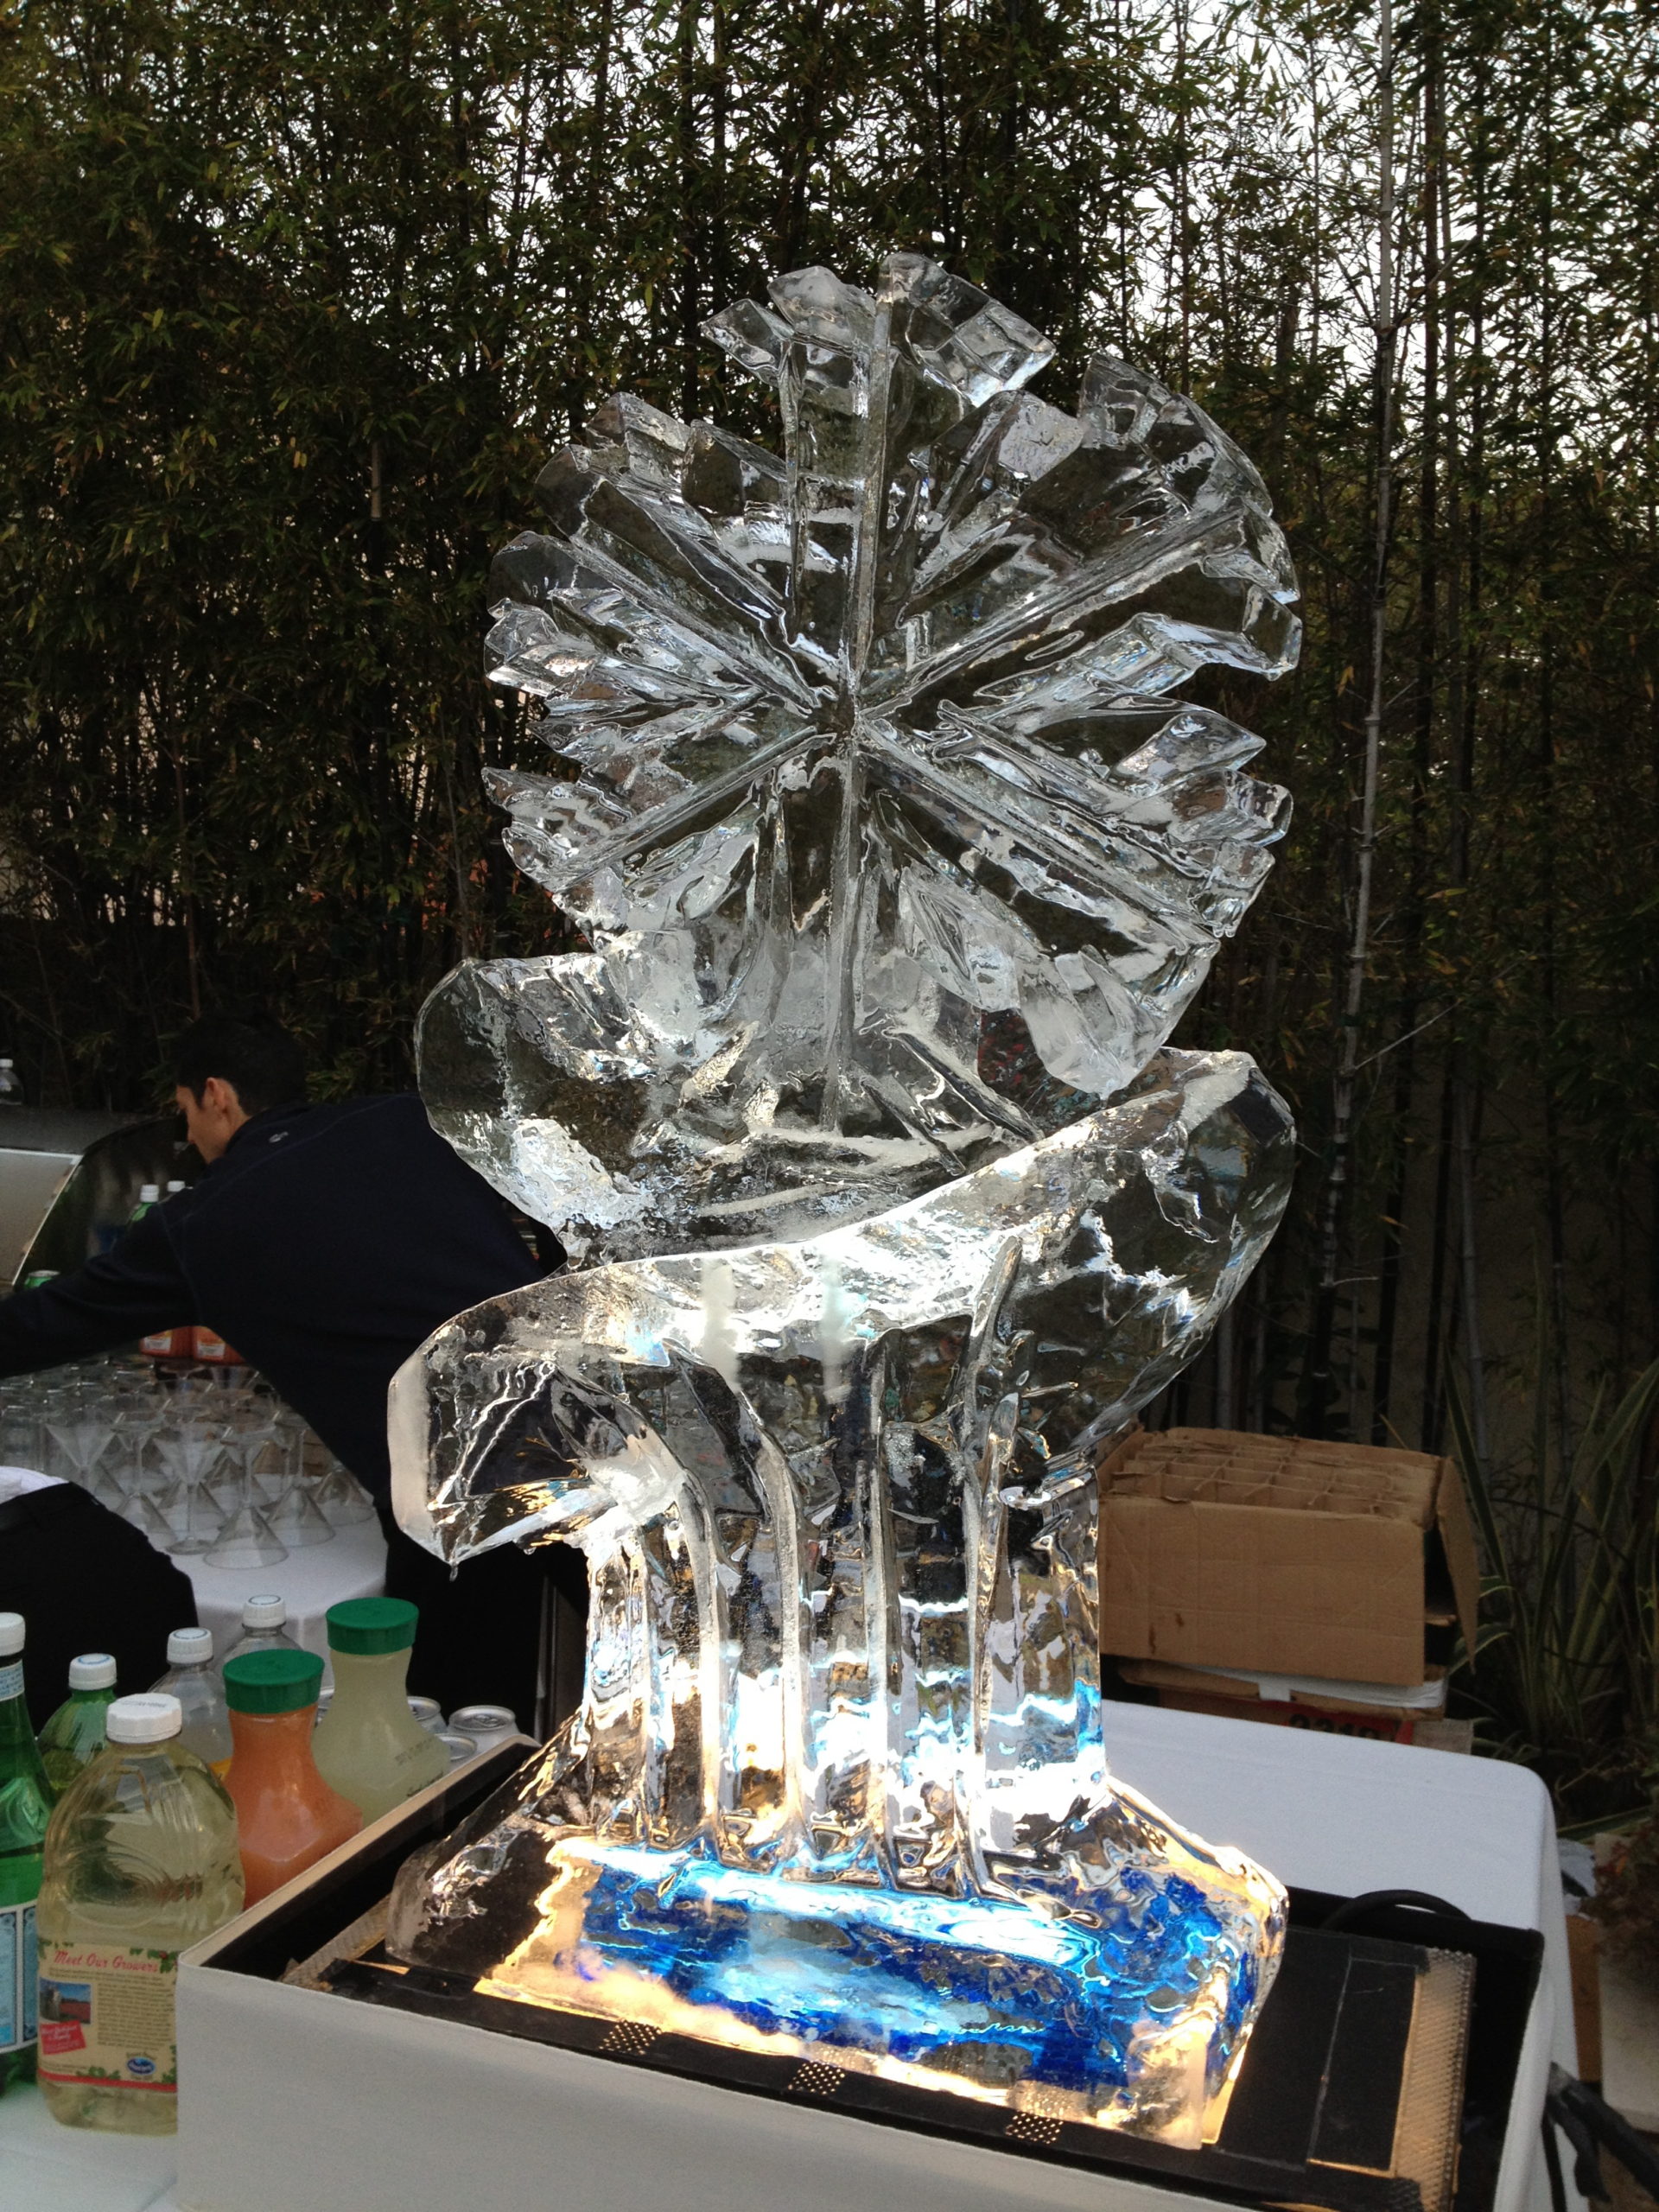 https://laiceart.com/wp-content/uploads/2021/05/Snowflake-spiral-luge-2012--scaled.jpg